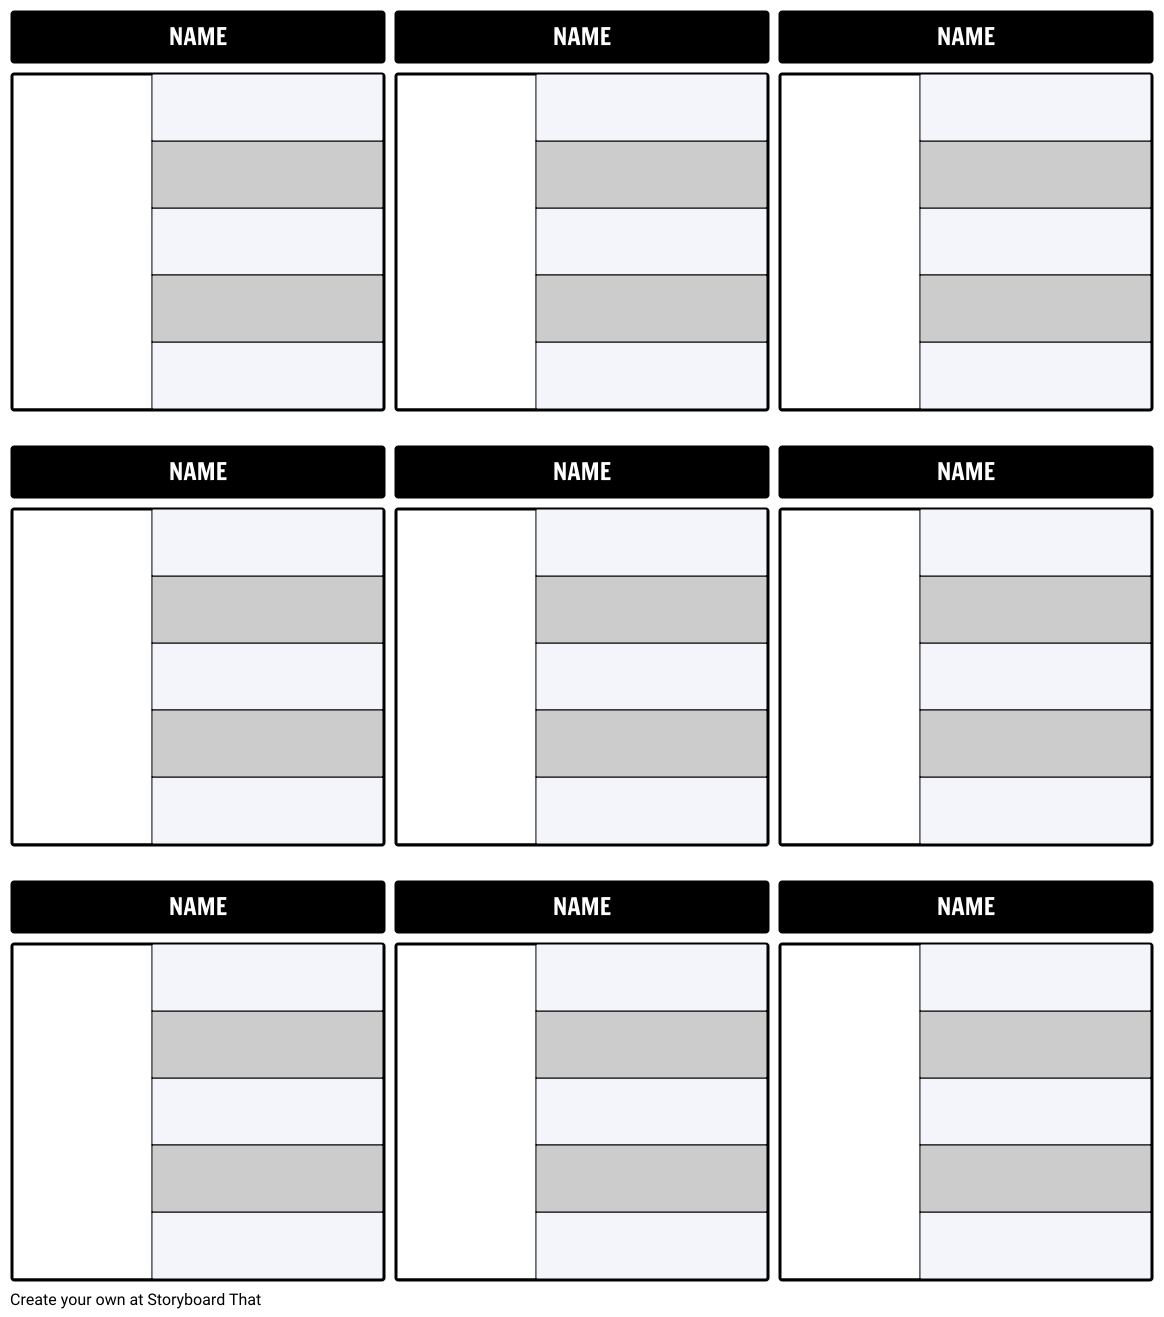 character-map-5-fields-blank-storyboard-by-anna-warfield